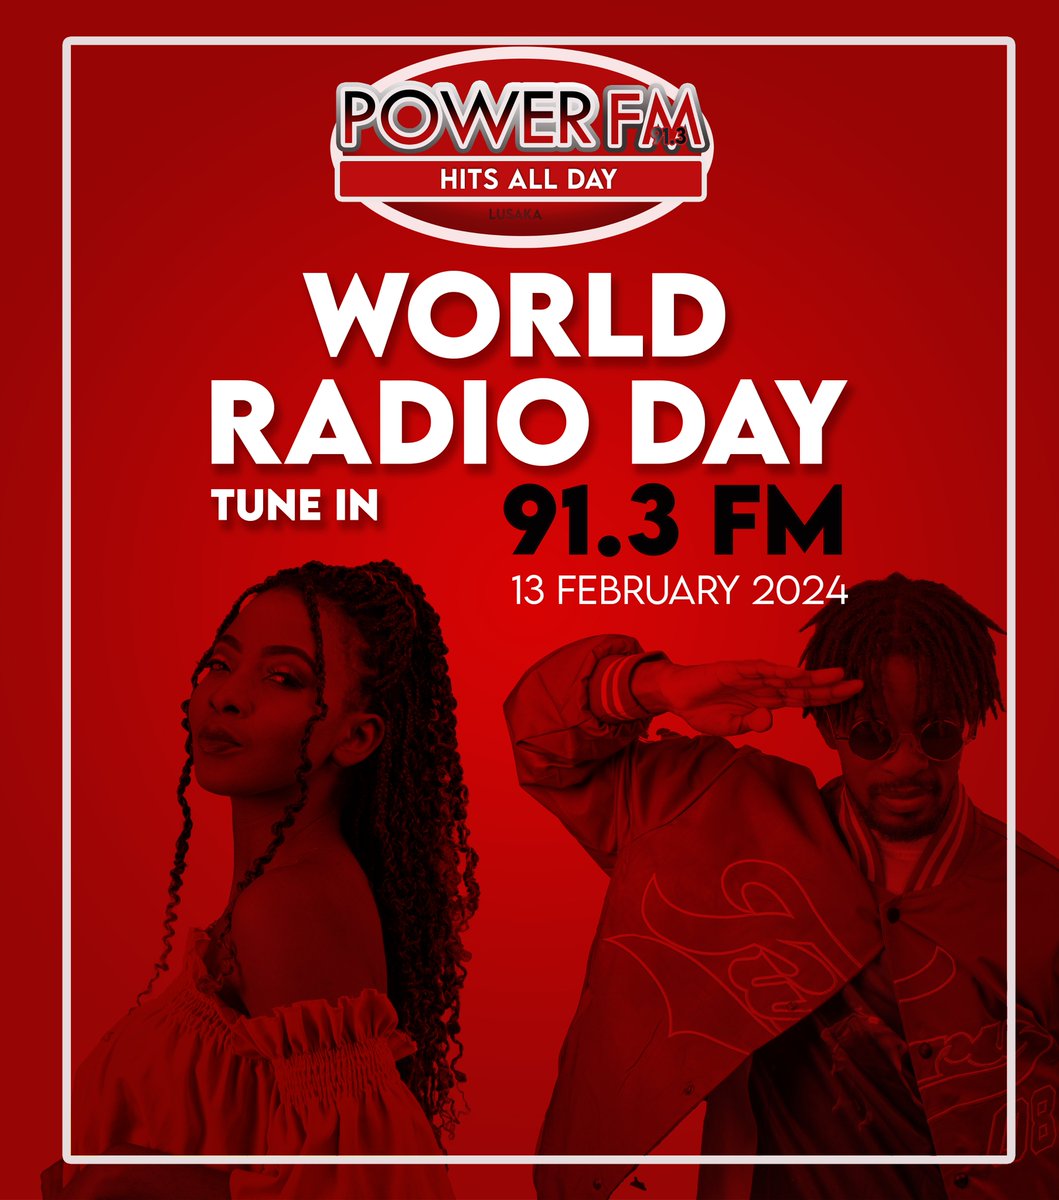 For over a decade, Power FM Zambia has been the heartbeat of Zambia's youth, consistently delivering chart-topping 'Zed na Afro' hits 24/7. Here's to 11 years of resonating power and connection. Happy World Radio Day! #WorldRadioDay2024 #PowerFMZambia #HitsAllDay #100ZedNaAfro